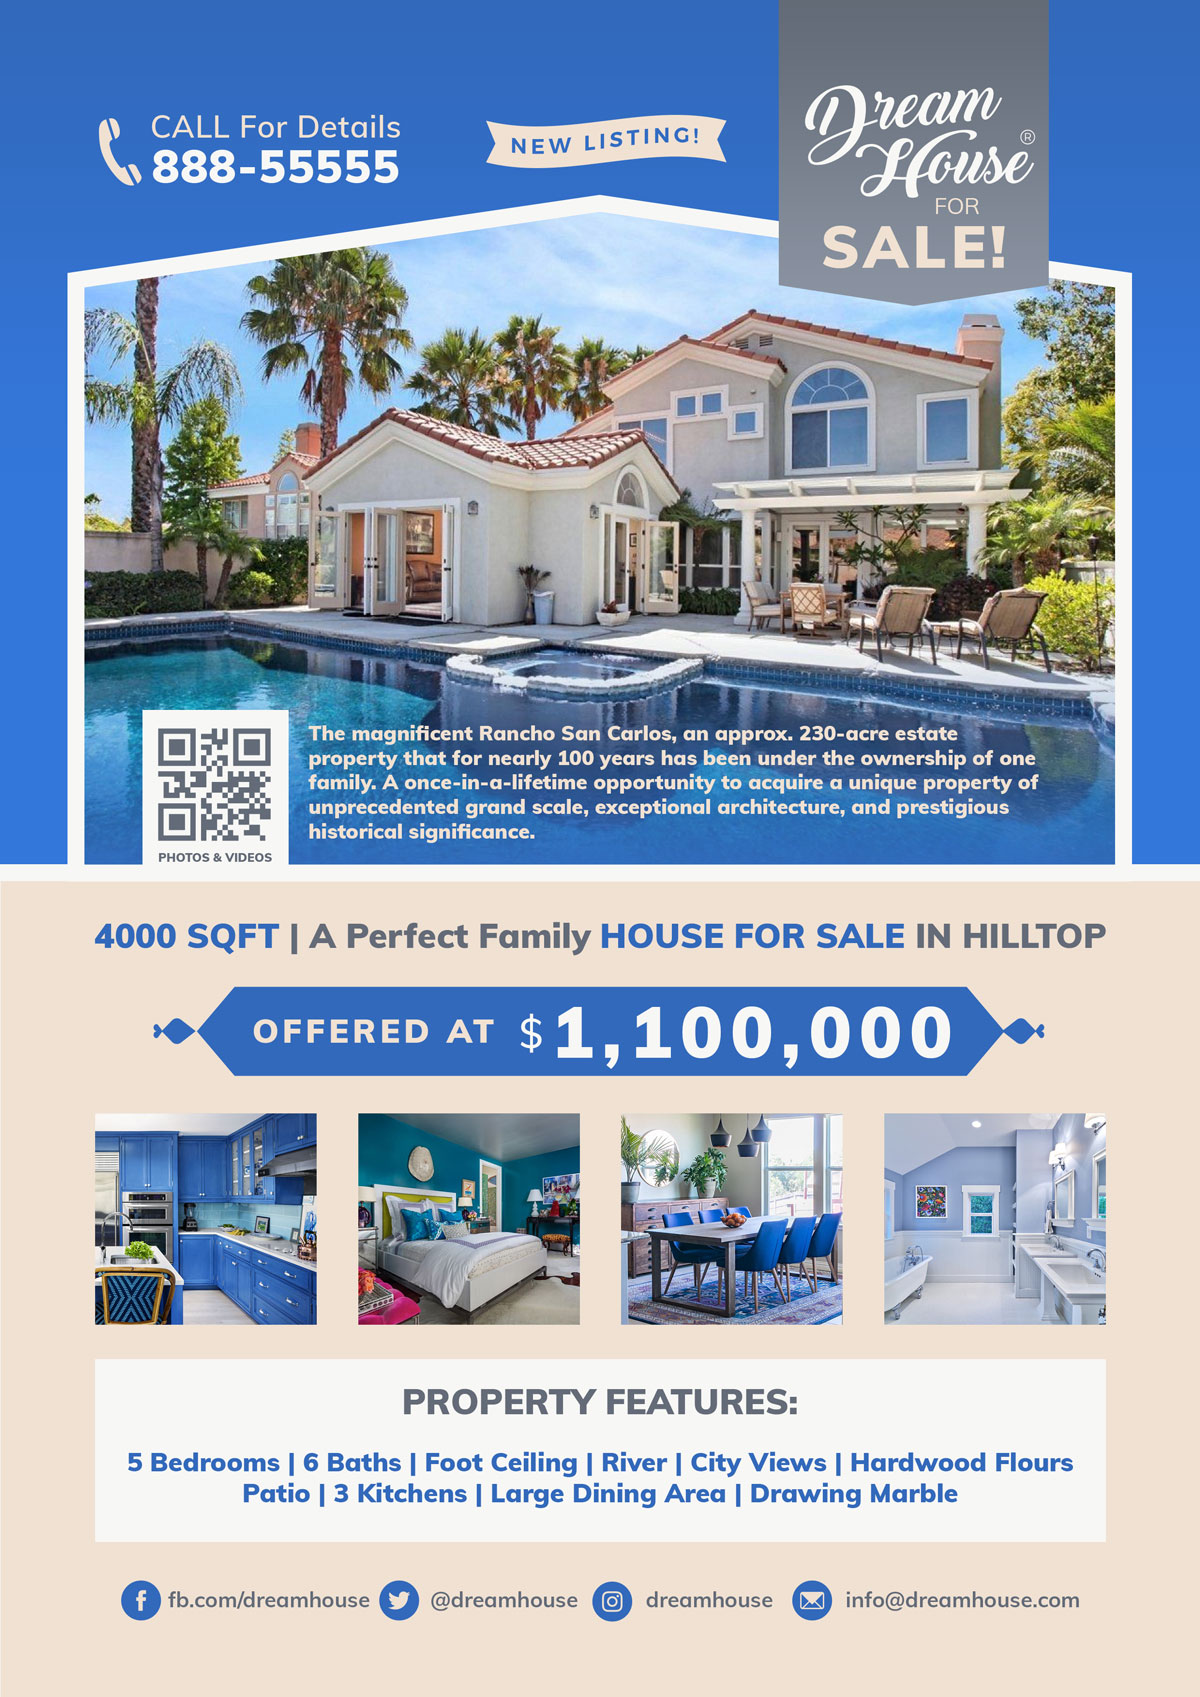 Free Real Estate / House for Sale Flyer Template in PSD - Designbolts Within Free Home For Sale Flyer Template